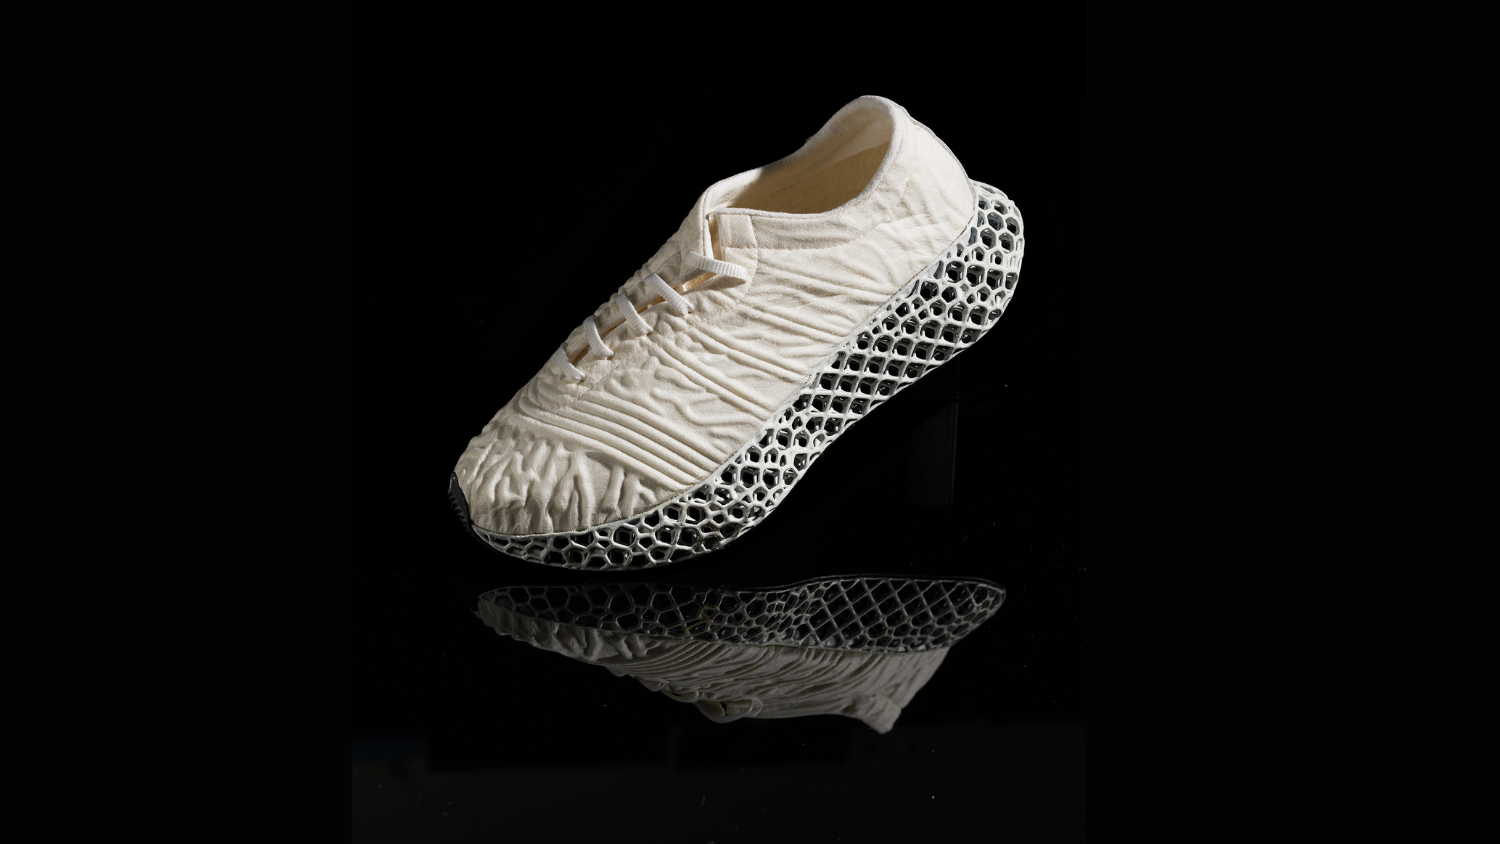 3-D printed black and white, low-top shoe